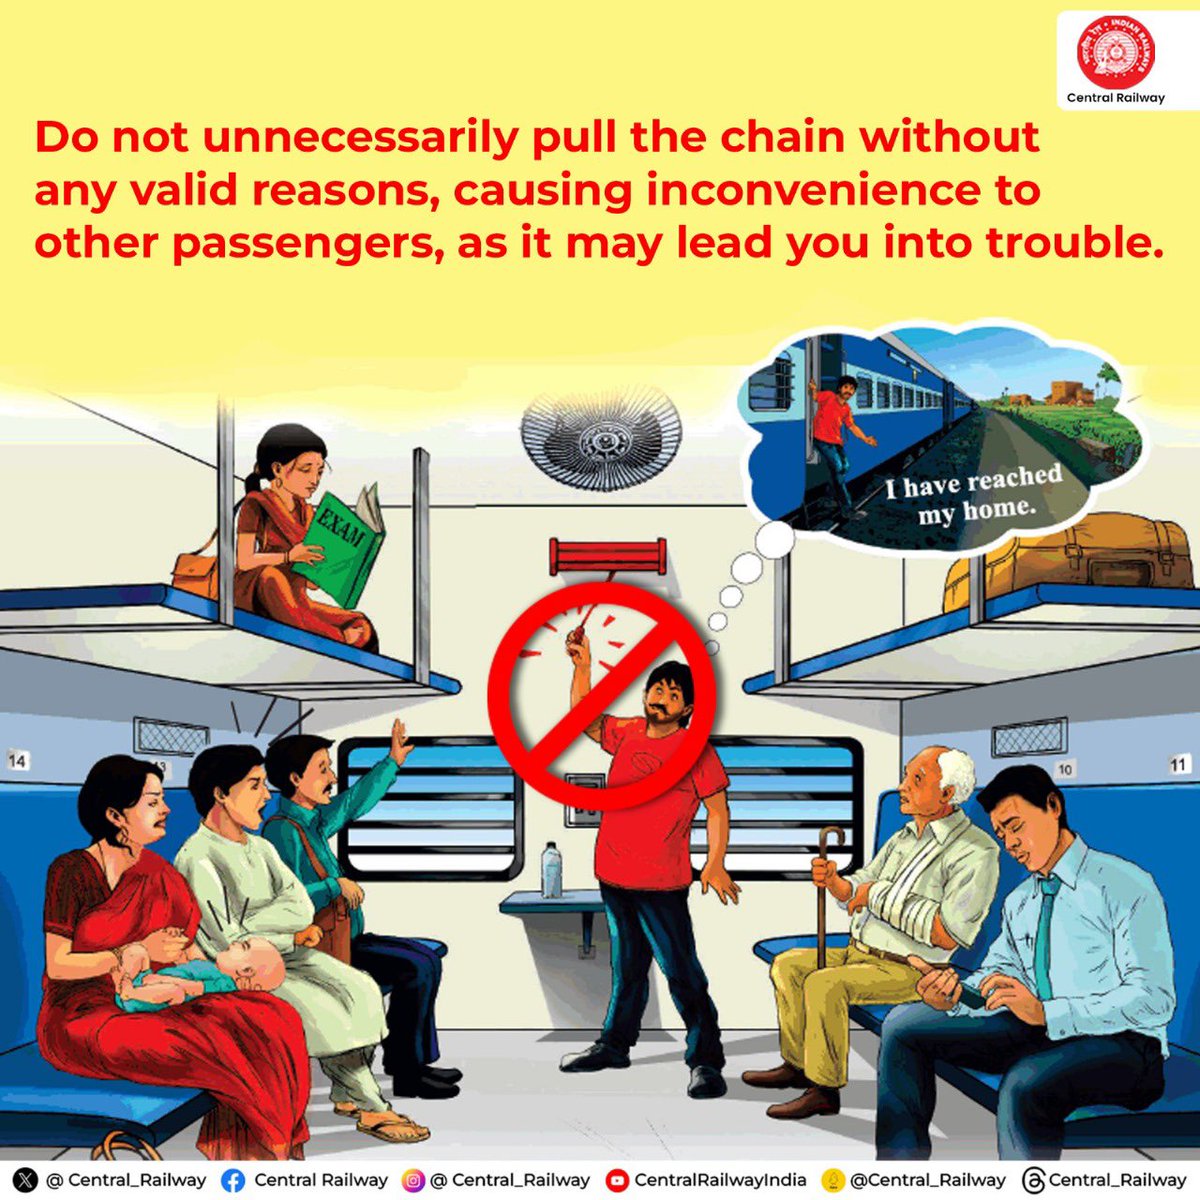 Pulling the train’s emergency chain without a valid reason is a punishable offence with imprisonment of up to 1 year and a fine or both under section 141 of the Railway Act 
#CentralRailway #RailwayRules #ResponsiblePassenger